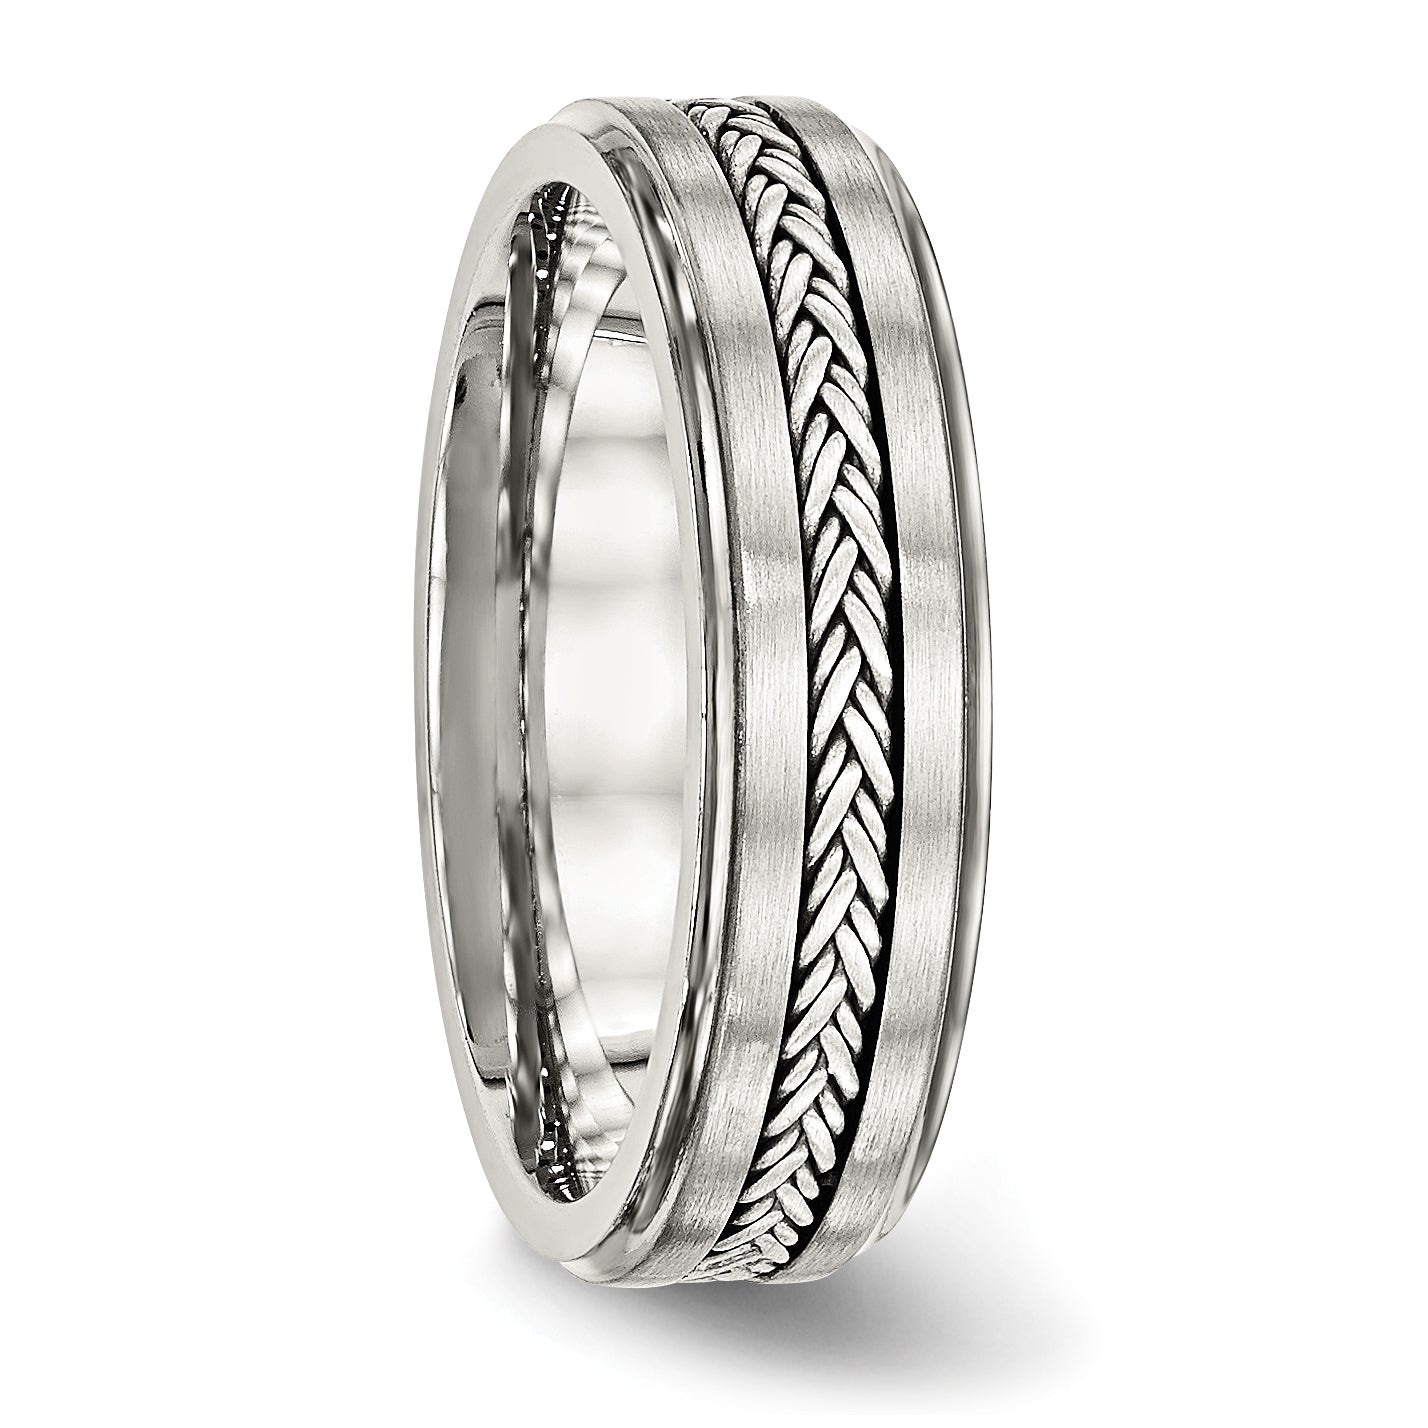 Stainless Steel WithSterling Silver Braid Inlay Brushed/Polished 6mm Band